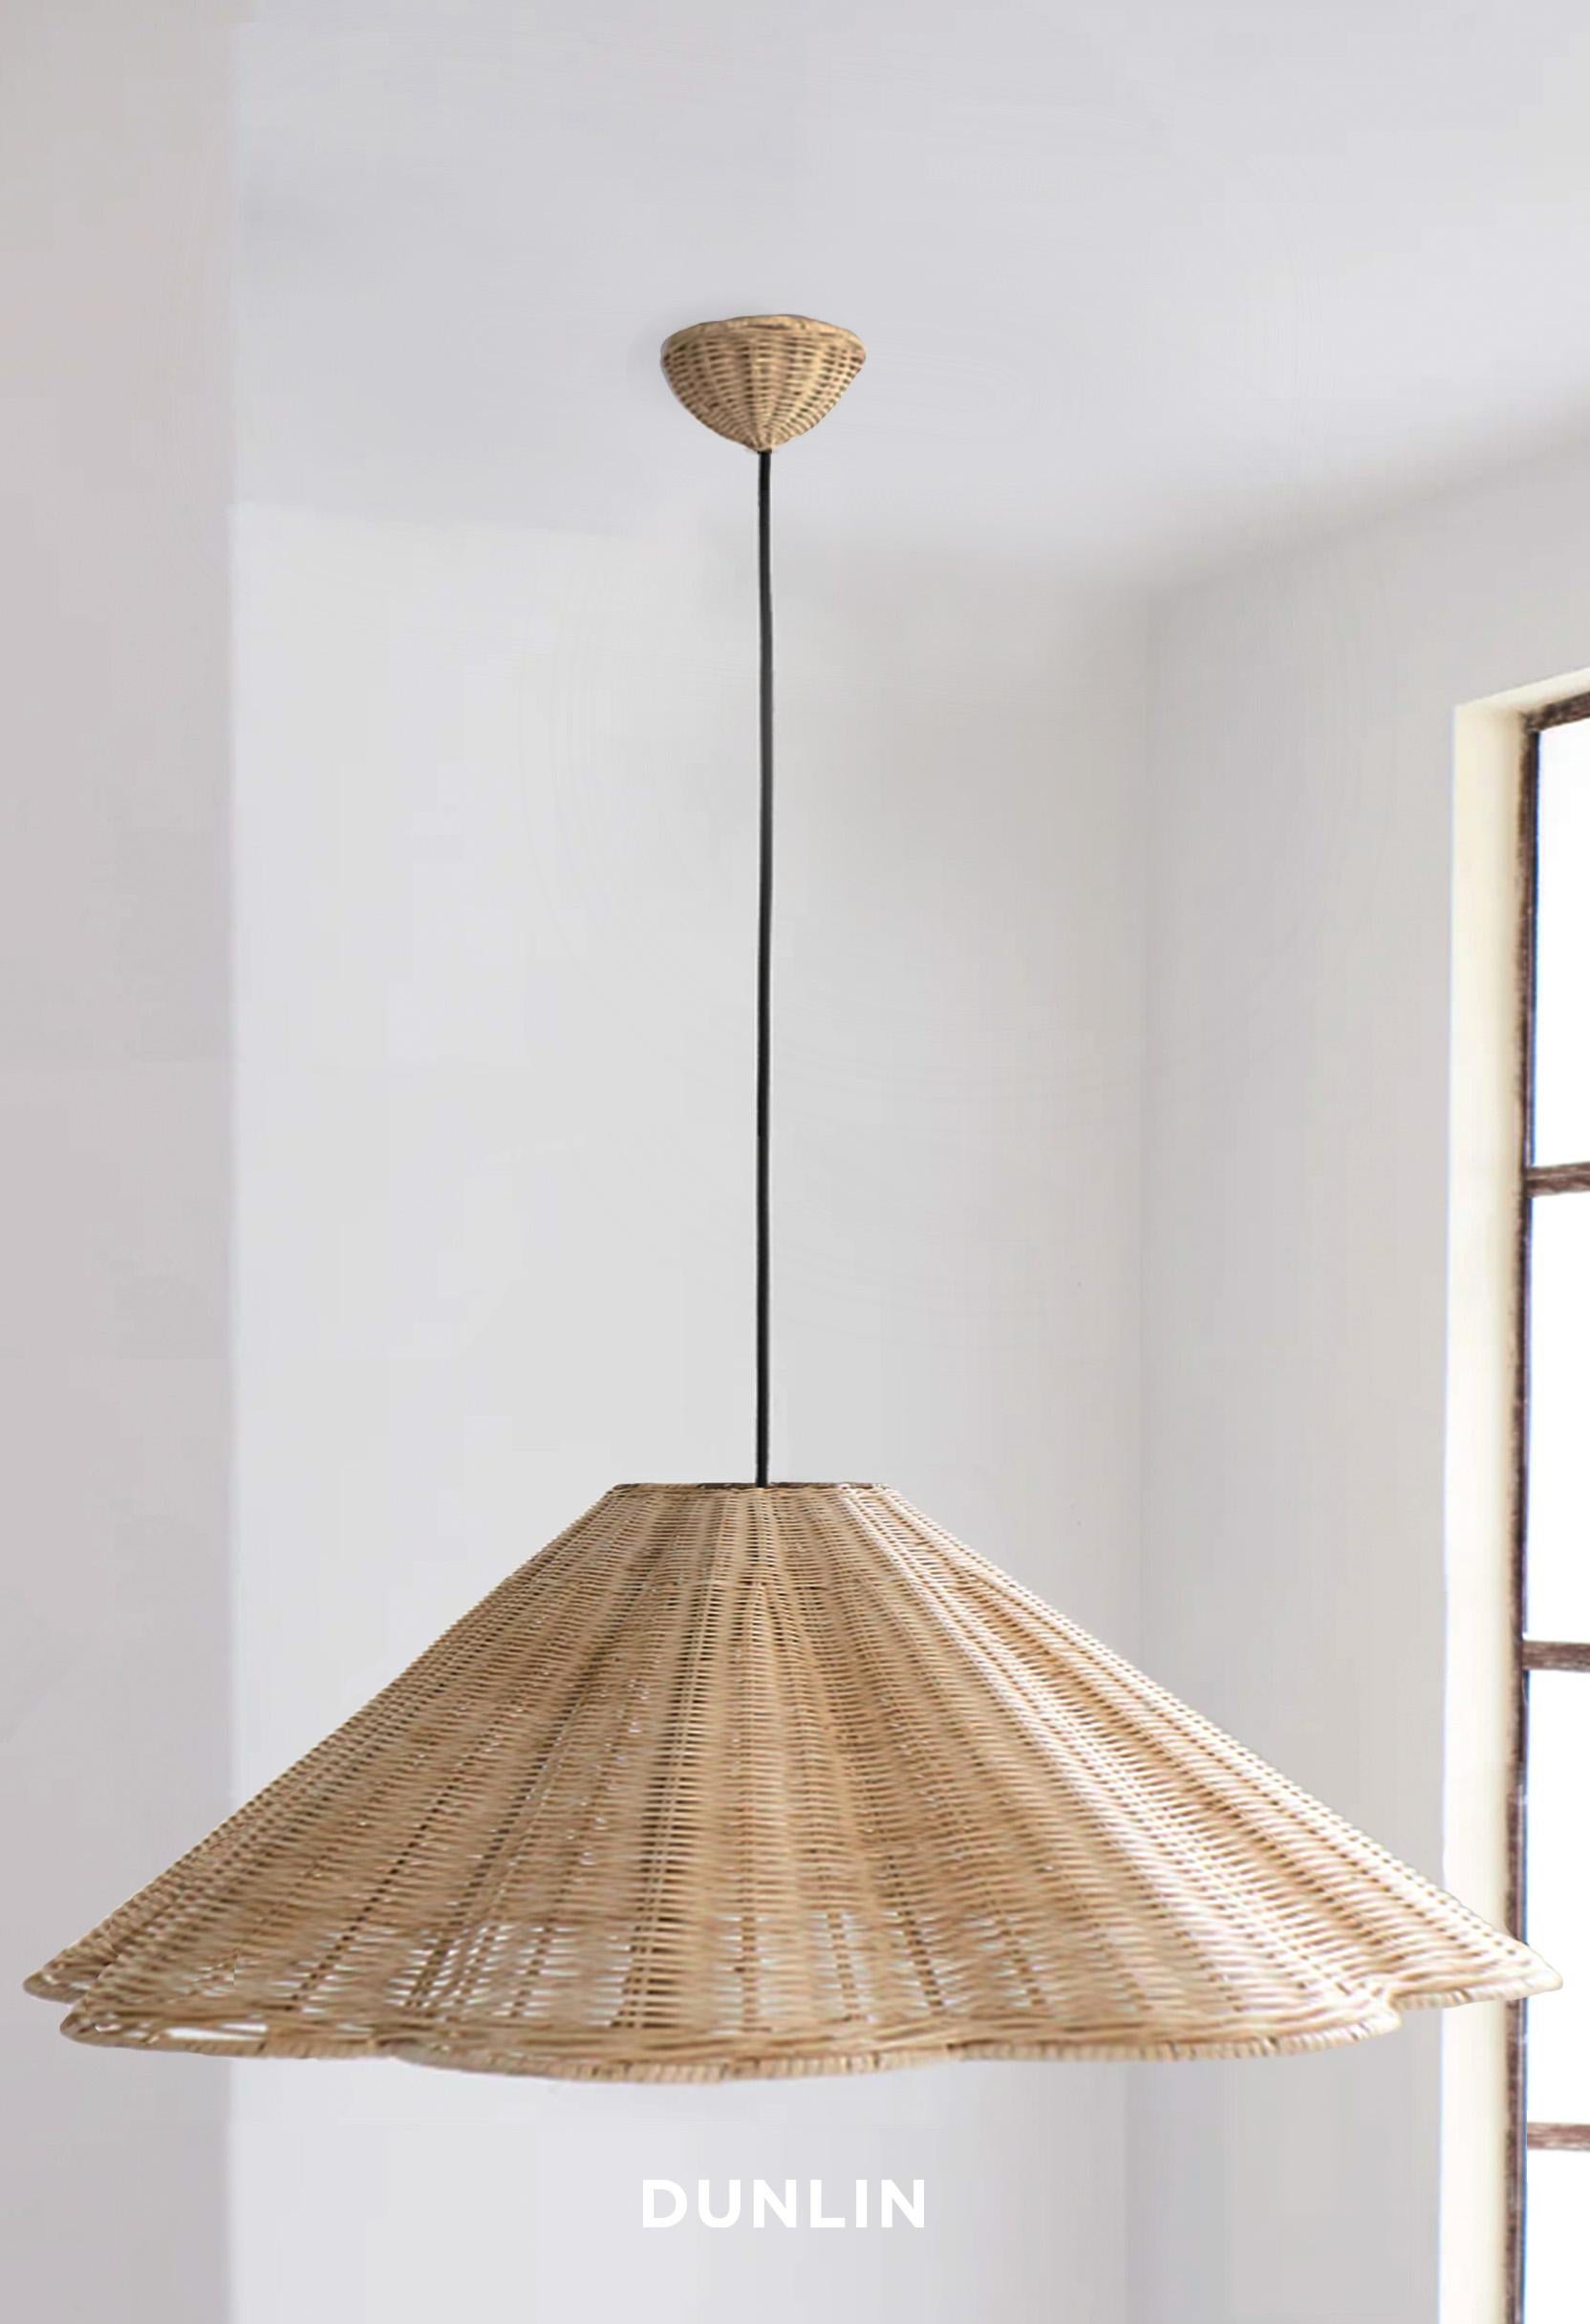 Handwoven Rattan in Indonesia. 
Designed by Dunlin. 

Introducing the latest addition to the Etna family, The Etna XL. A stunning pendant light or statement piece for any Living Room, Entry way or Dining Space. With its elegant, perfectly